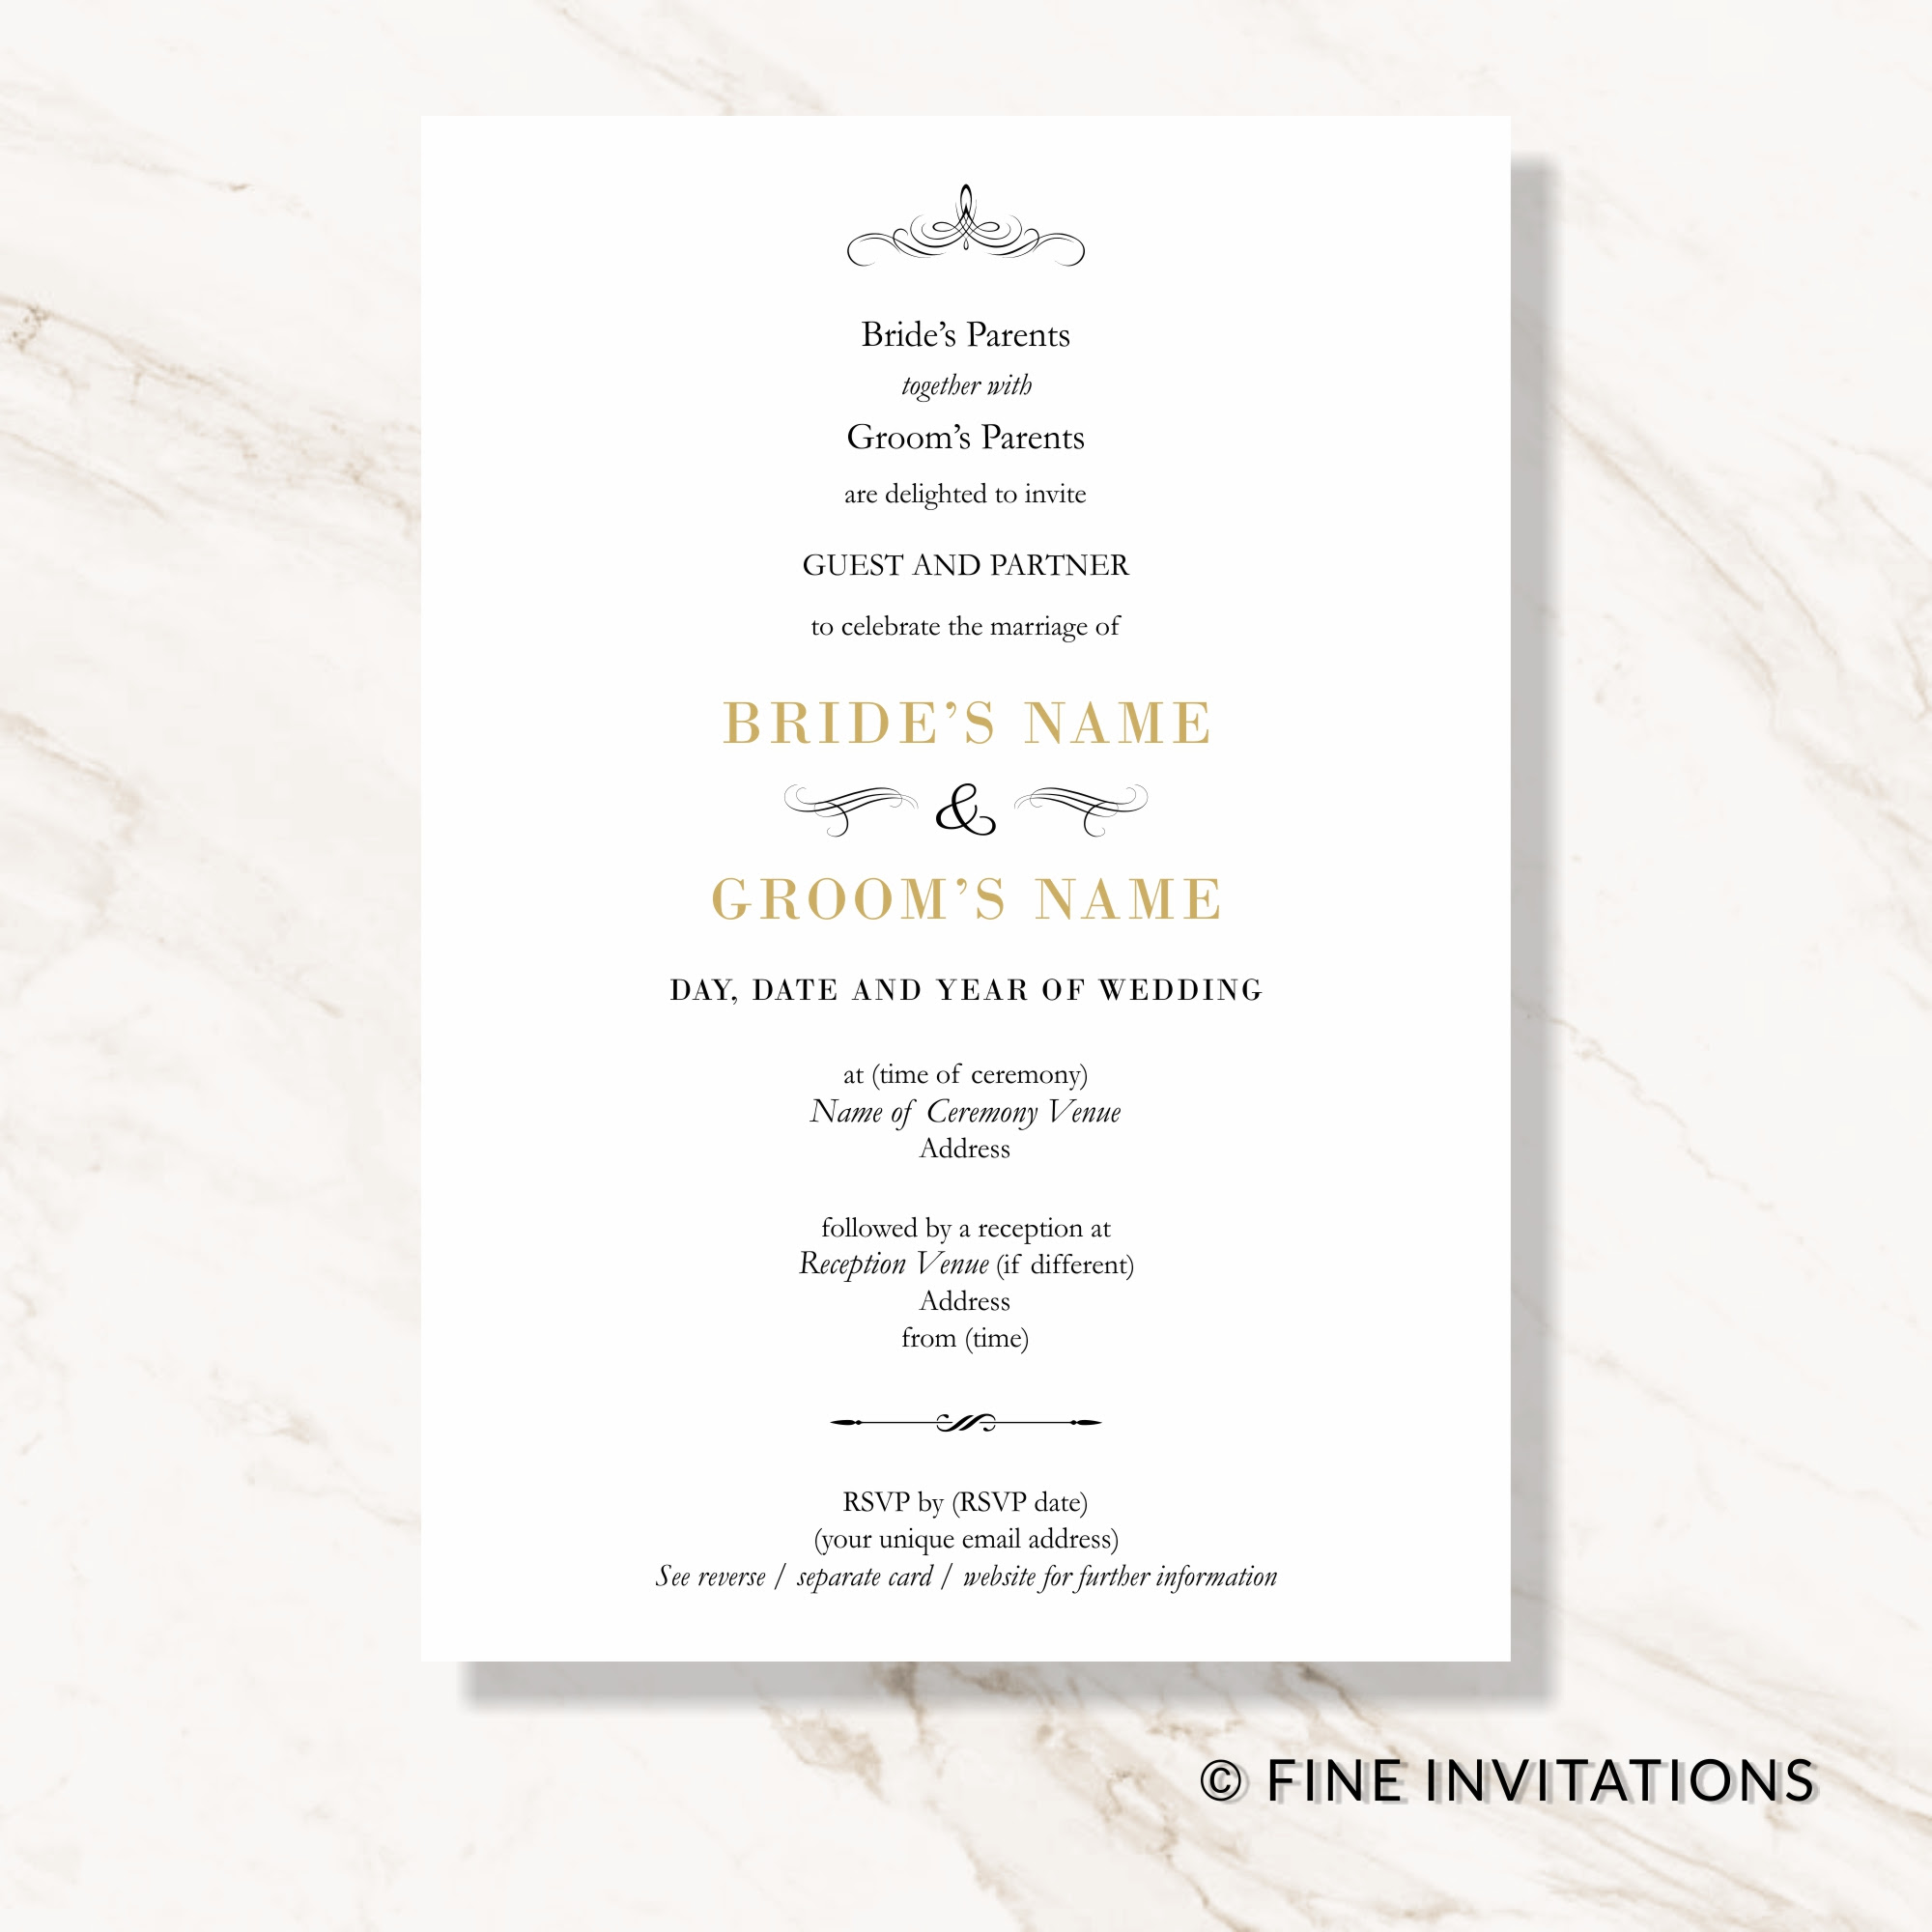 Wedding Invitation Ceremony And Reception At Different Place